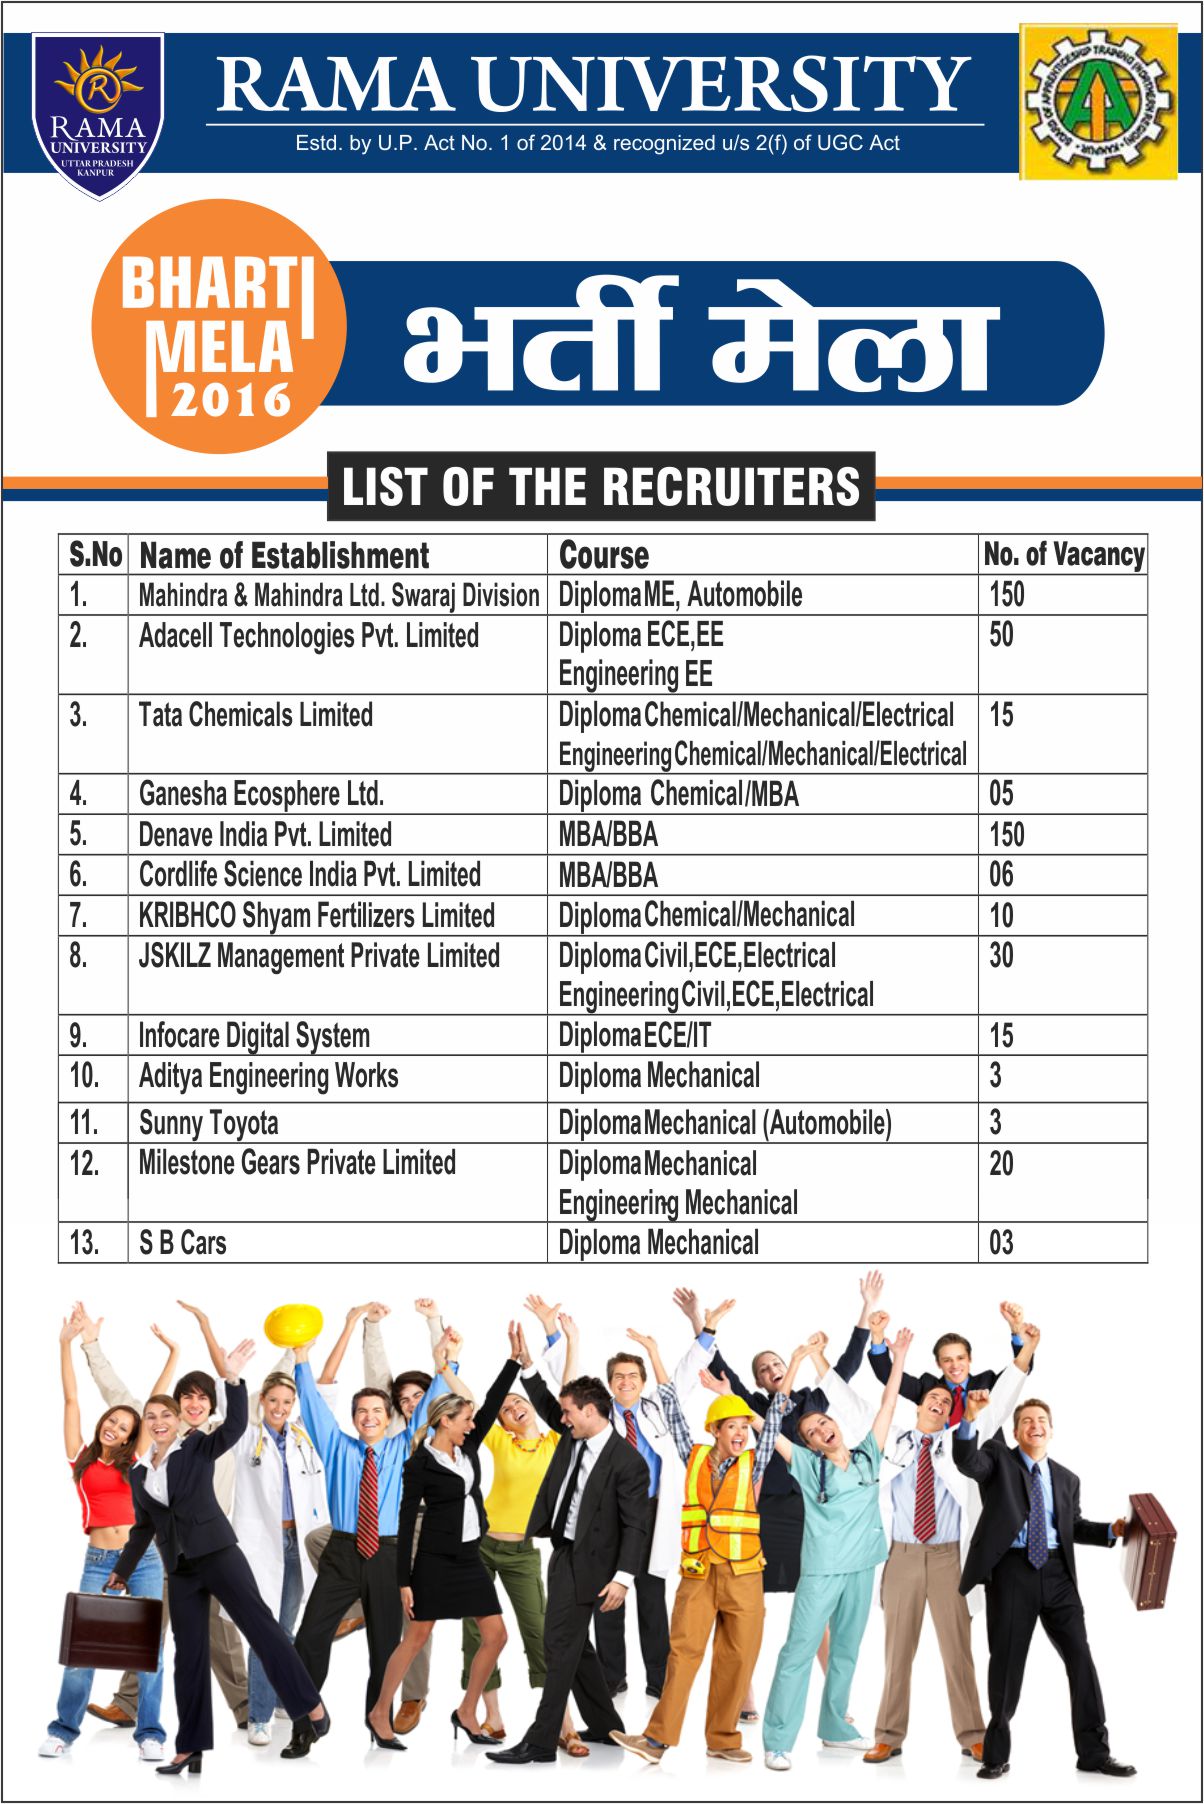 List of Recruiters